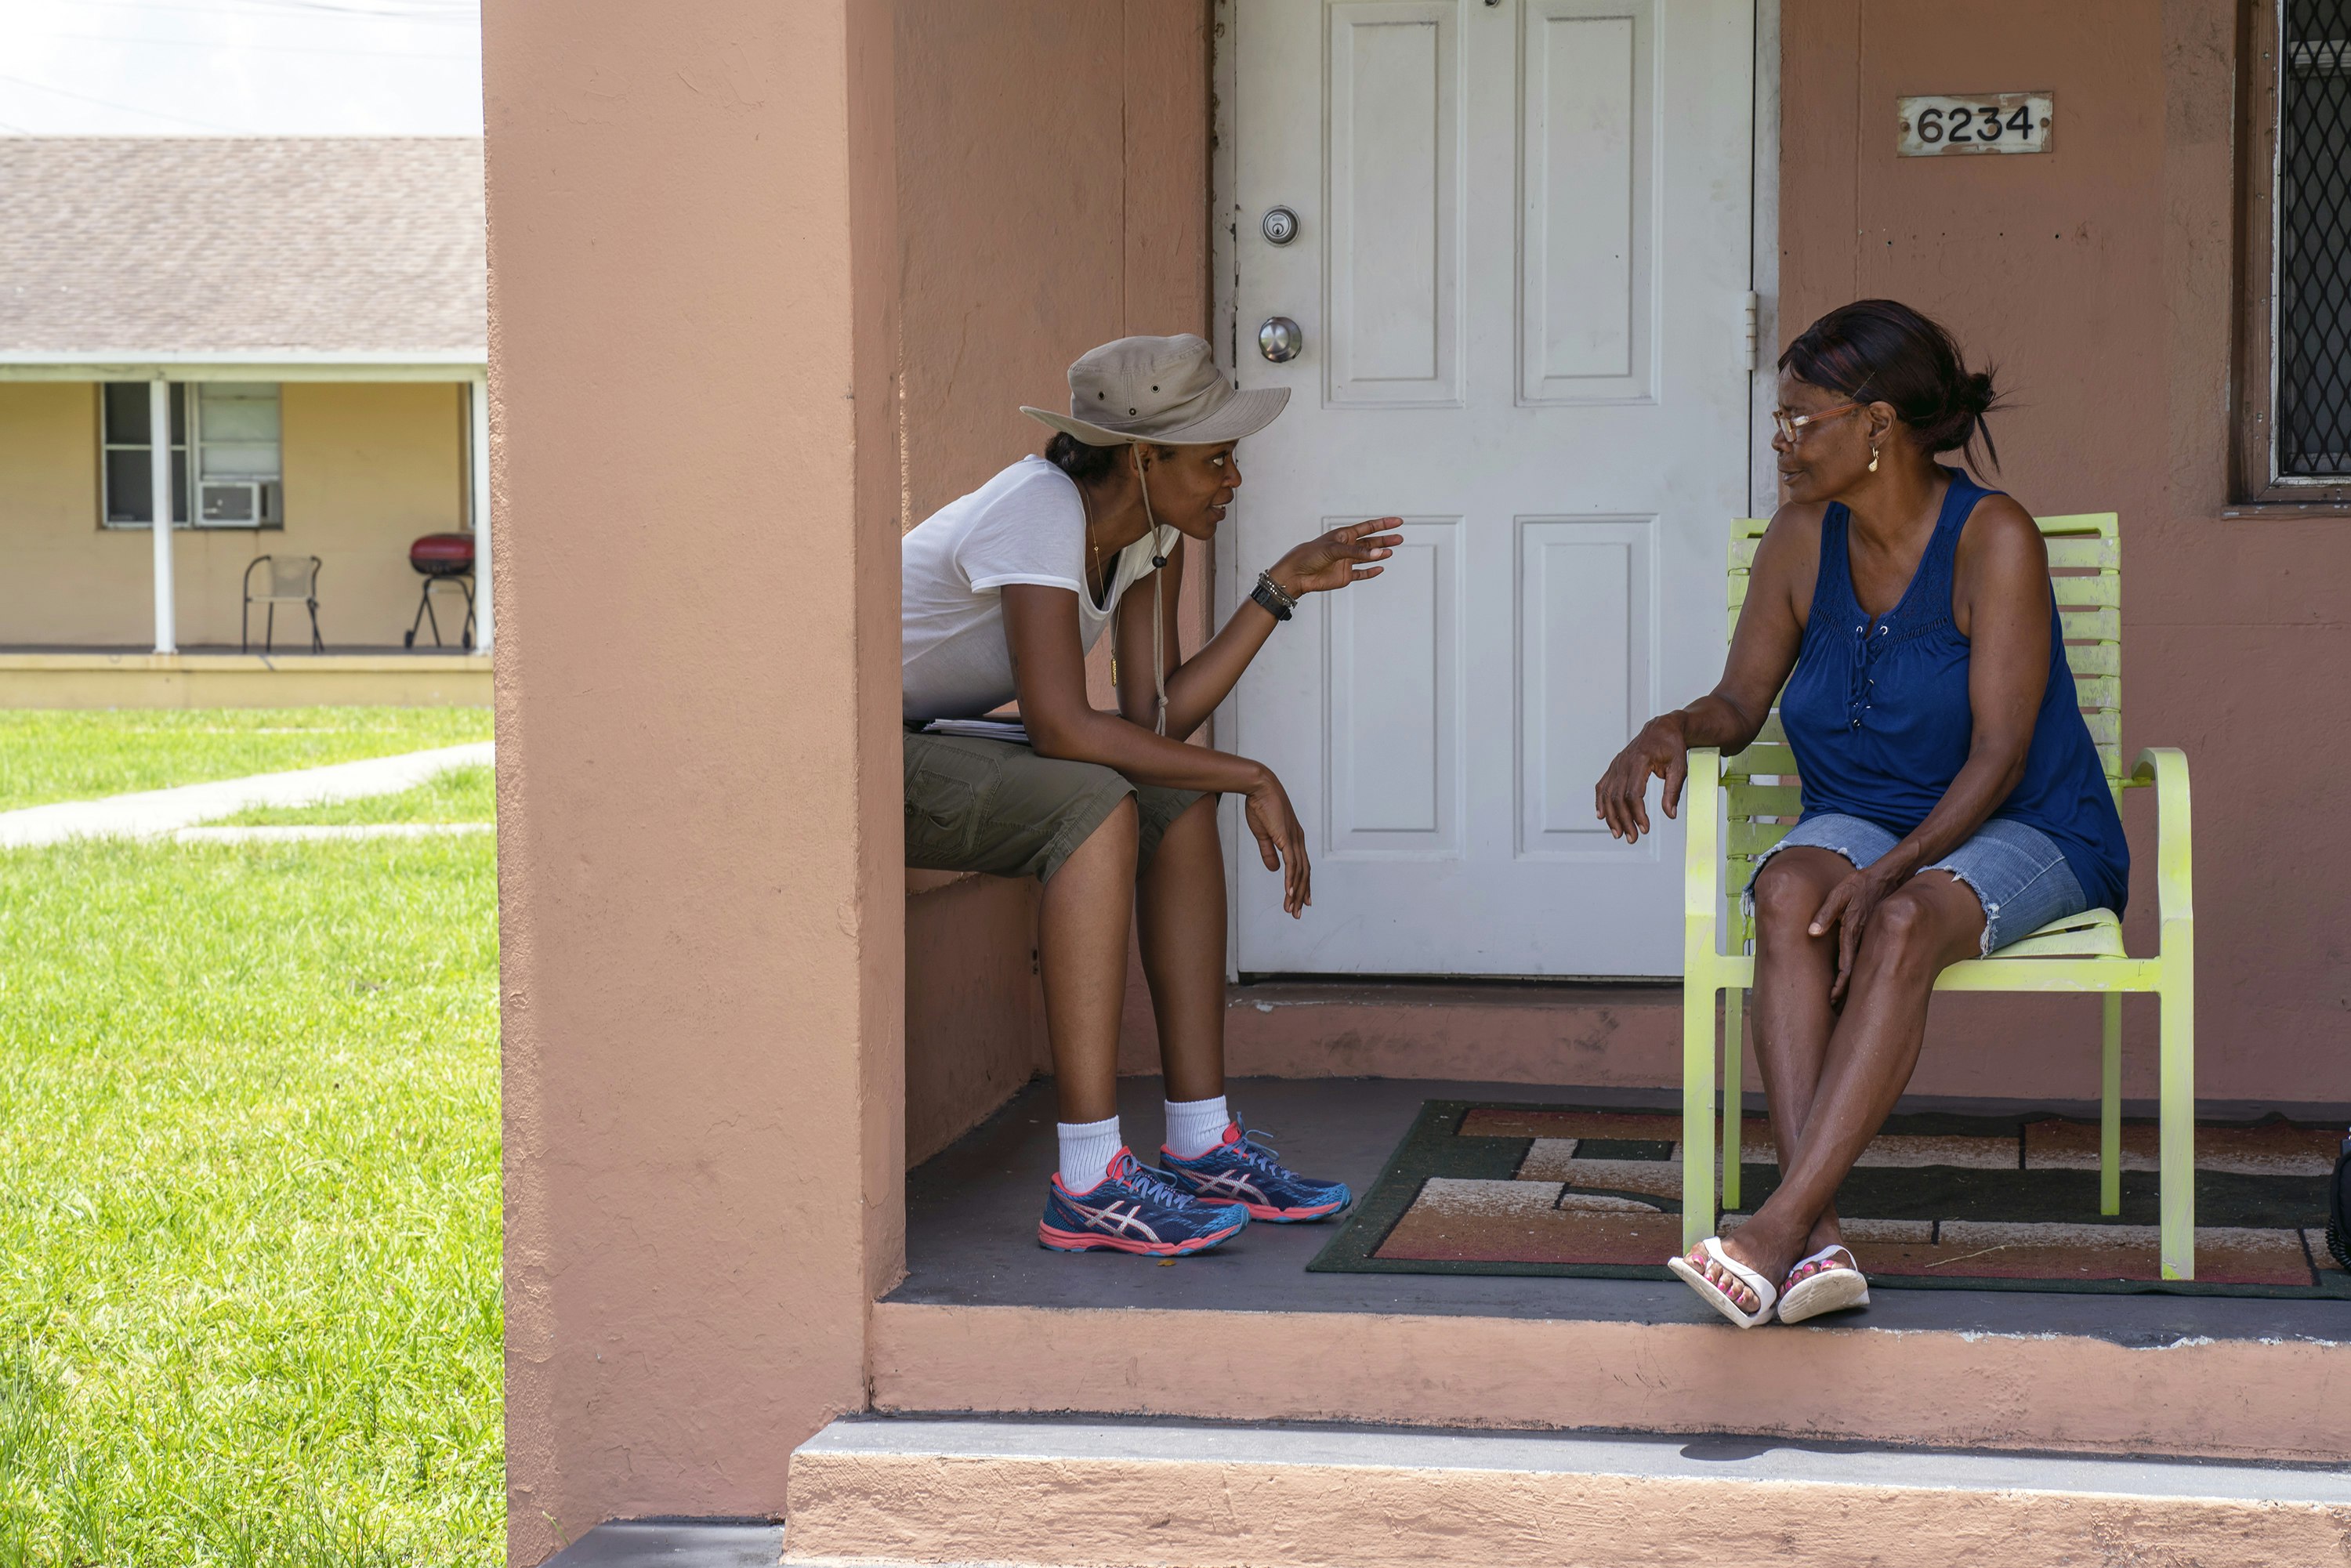 Faren Humes speaks to a woman sitting in a bright green chair on a Liberty Square porch